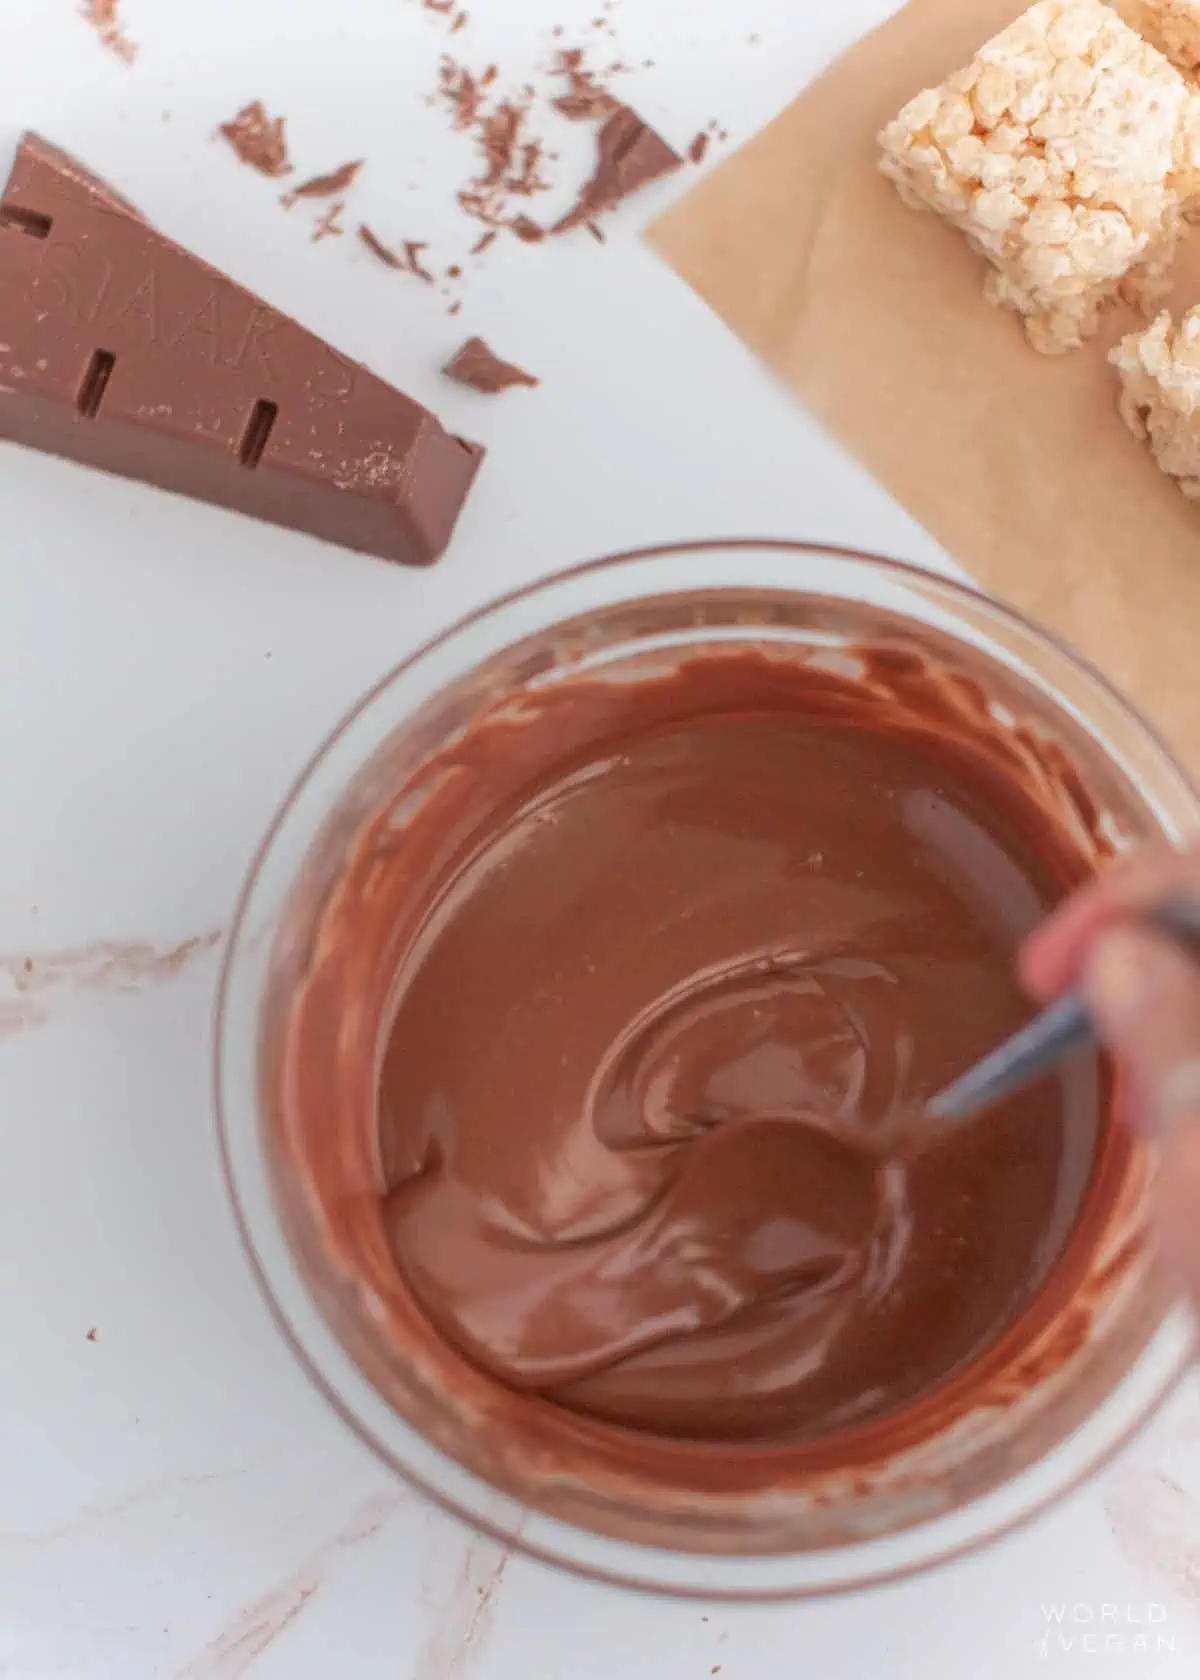 melt dairy free chocolate in double boiler